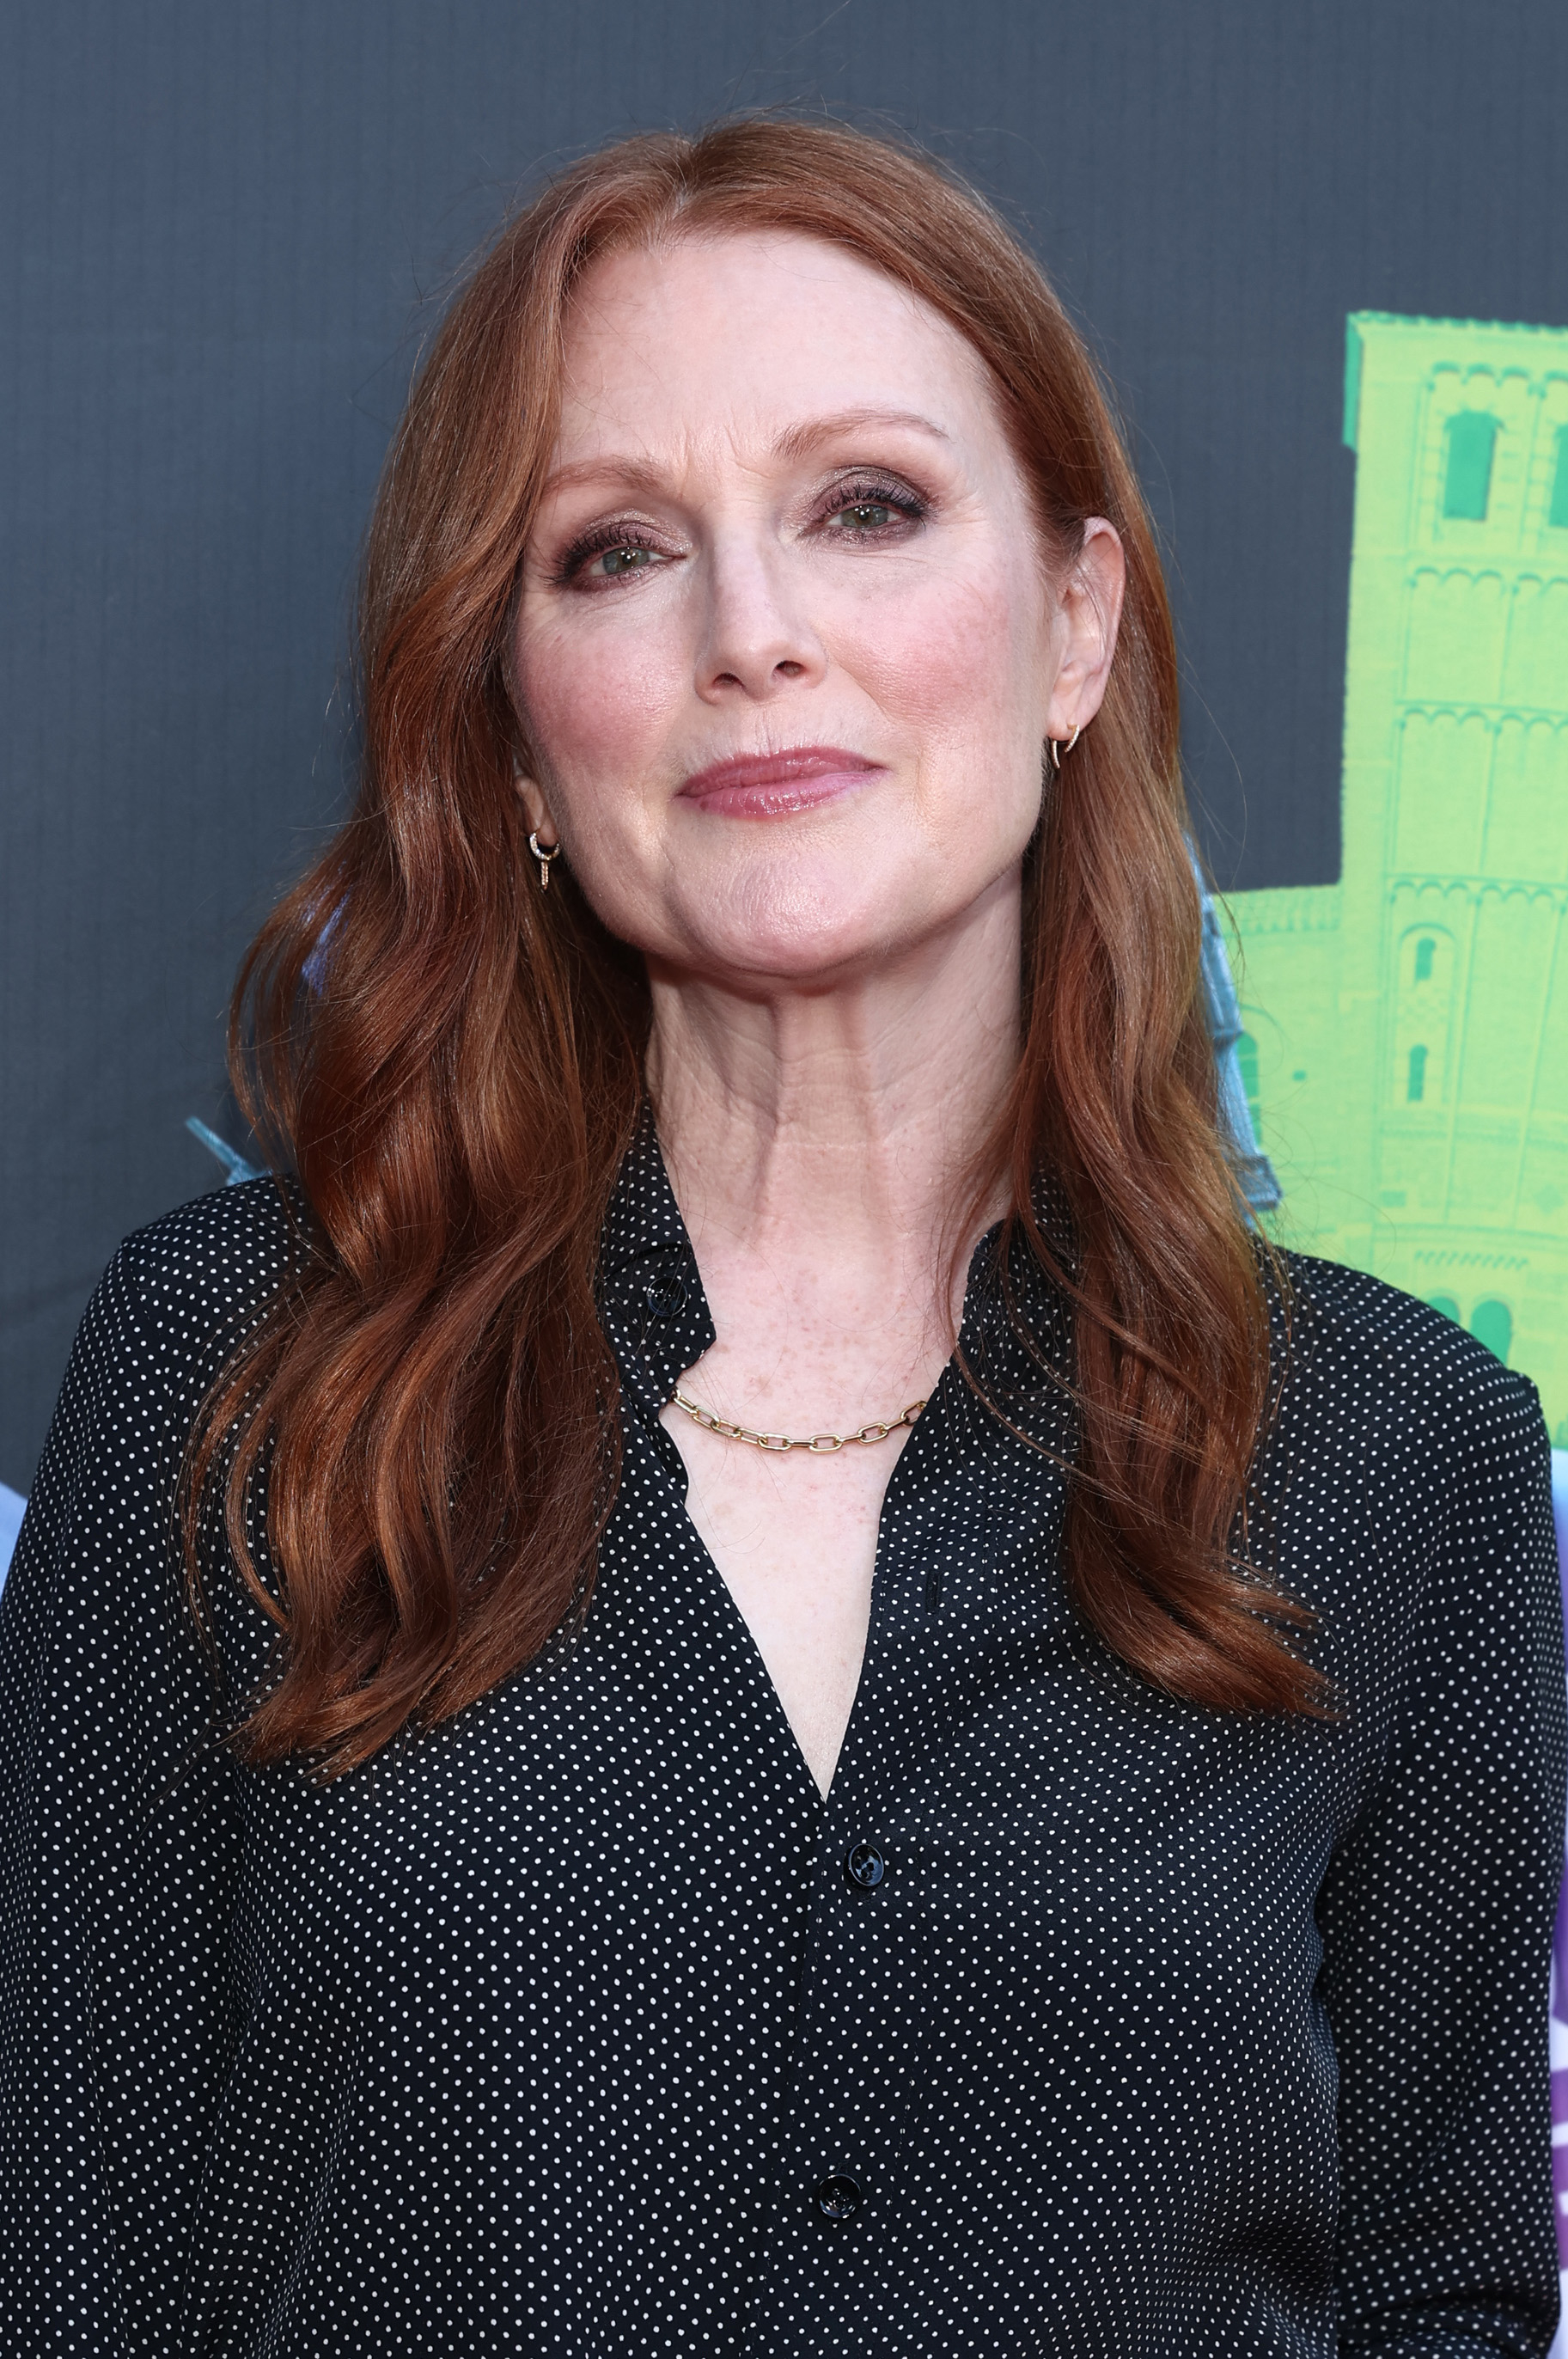 Close-up of Julianne at a media event